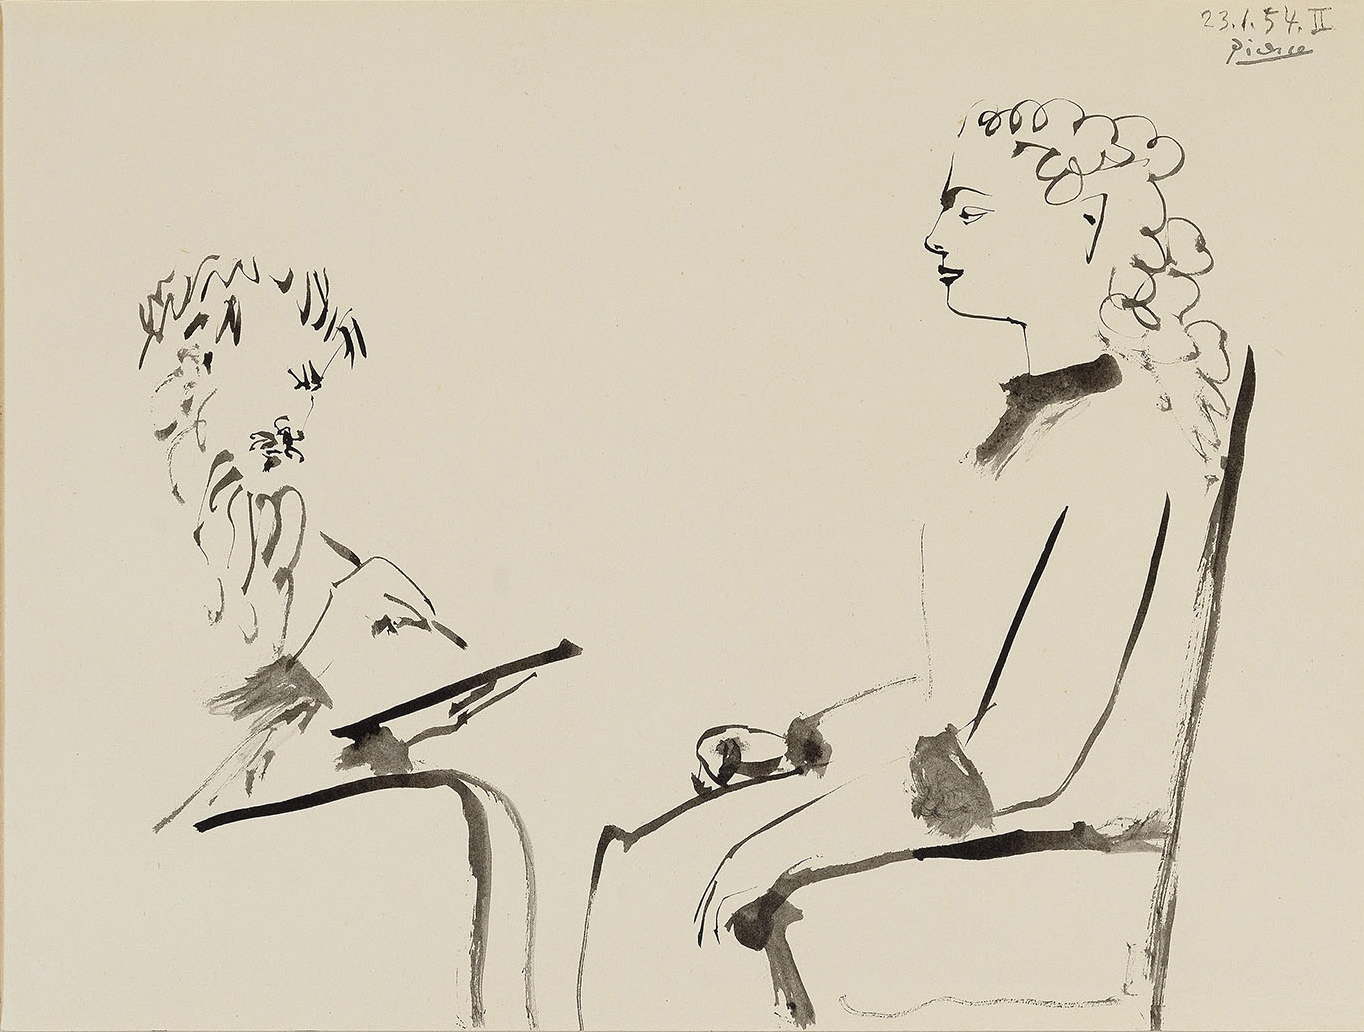 PABLO PICASSO (1881-1973)                                                                                                   Ink wash on paper24 x 32 cmSigned and dated in ink: 23.1.54. II.Literature: Zervos Volume 16, 206.Provenance:   Galerie Louise Leiris, Paris (stock 06261)Herman C. Goldsmith, New YorkGBP 210,000 